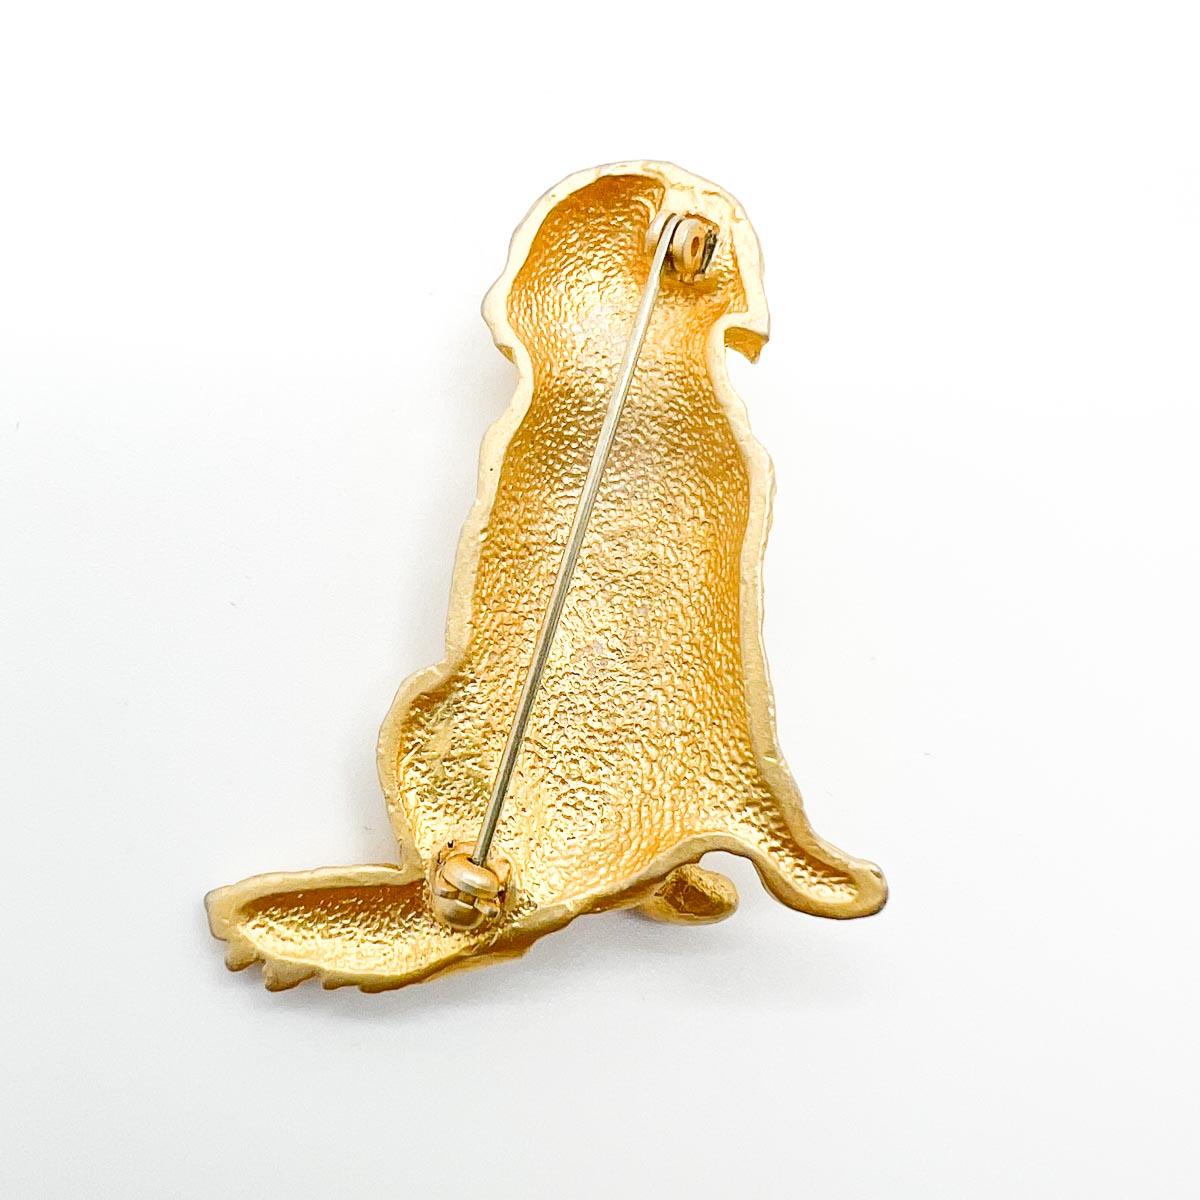 A Vintage Golden Retriever Brooch. Beautifully modelled, delightful quality; a perfect pin for the dog adorer.
An unsigned beauty. A rare treasure. Just because a jewel doesn’t carry a designer name, doesn’t mean it isn't coveted. The unsigned